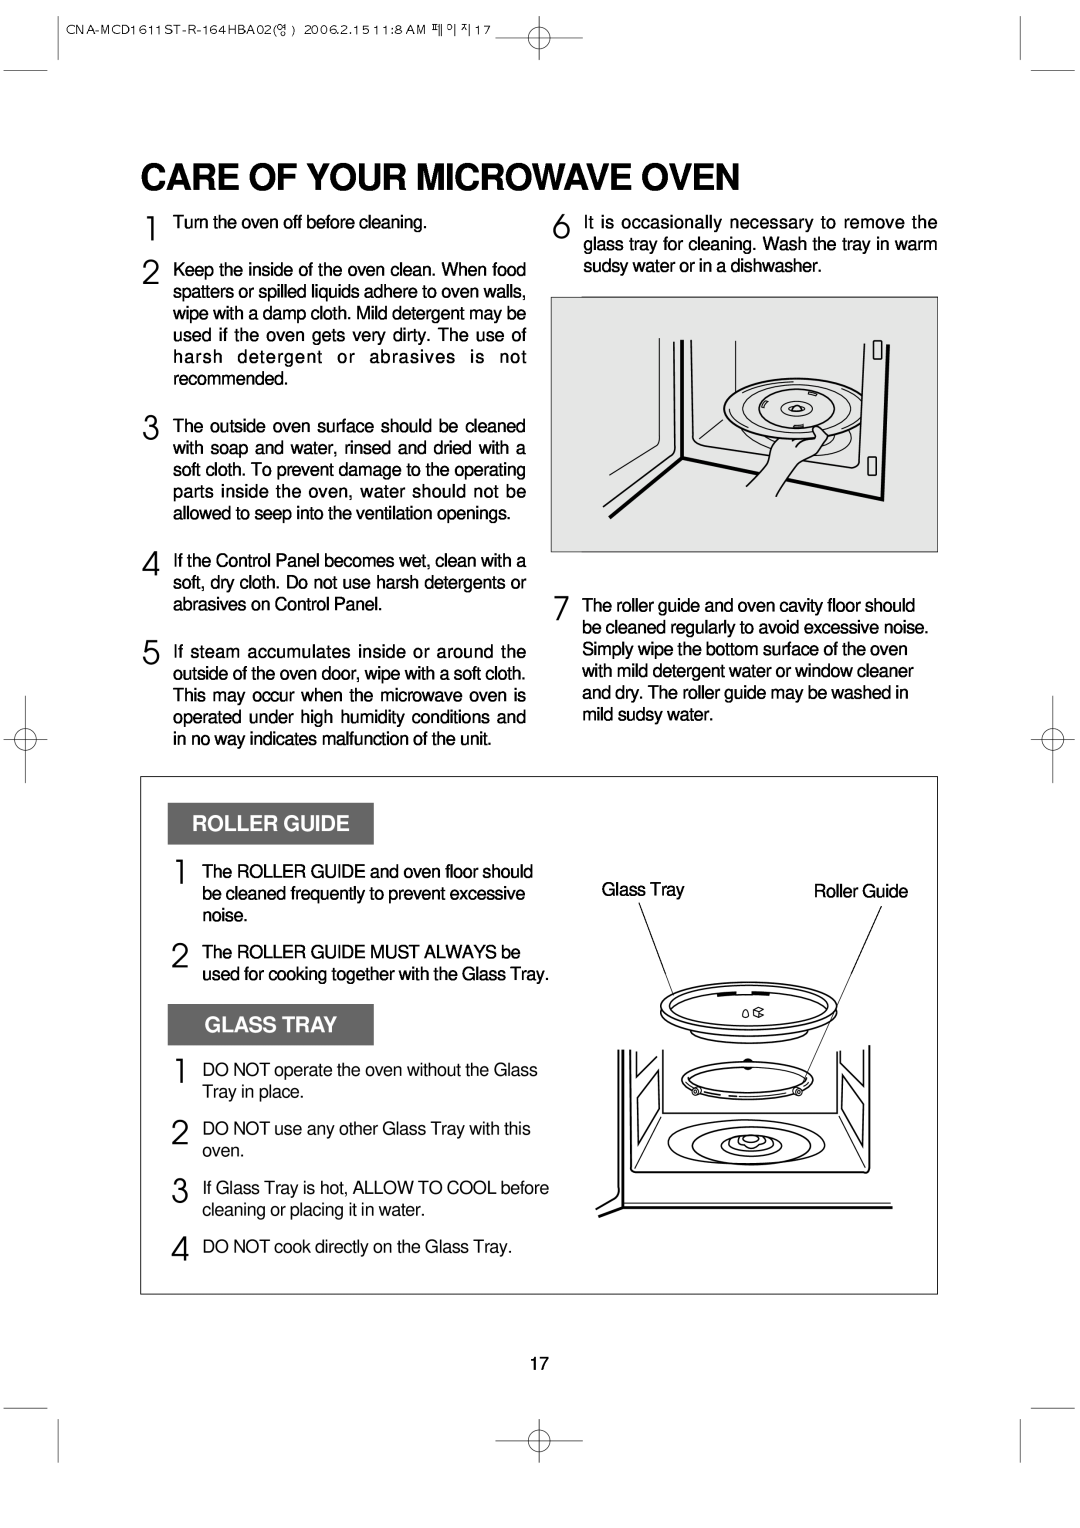 Magic Chef MCD1611ST manual Care Of Your Microwave Oven, Roller Guide, Glass Tray 